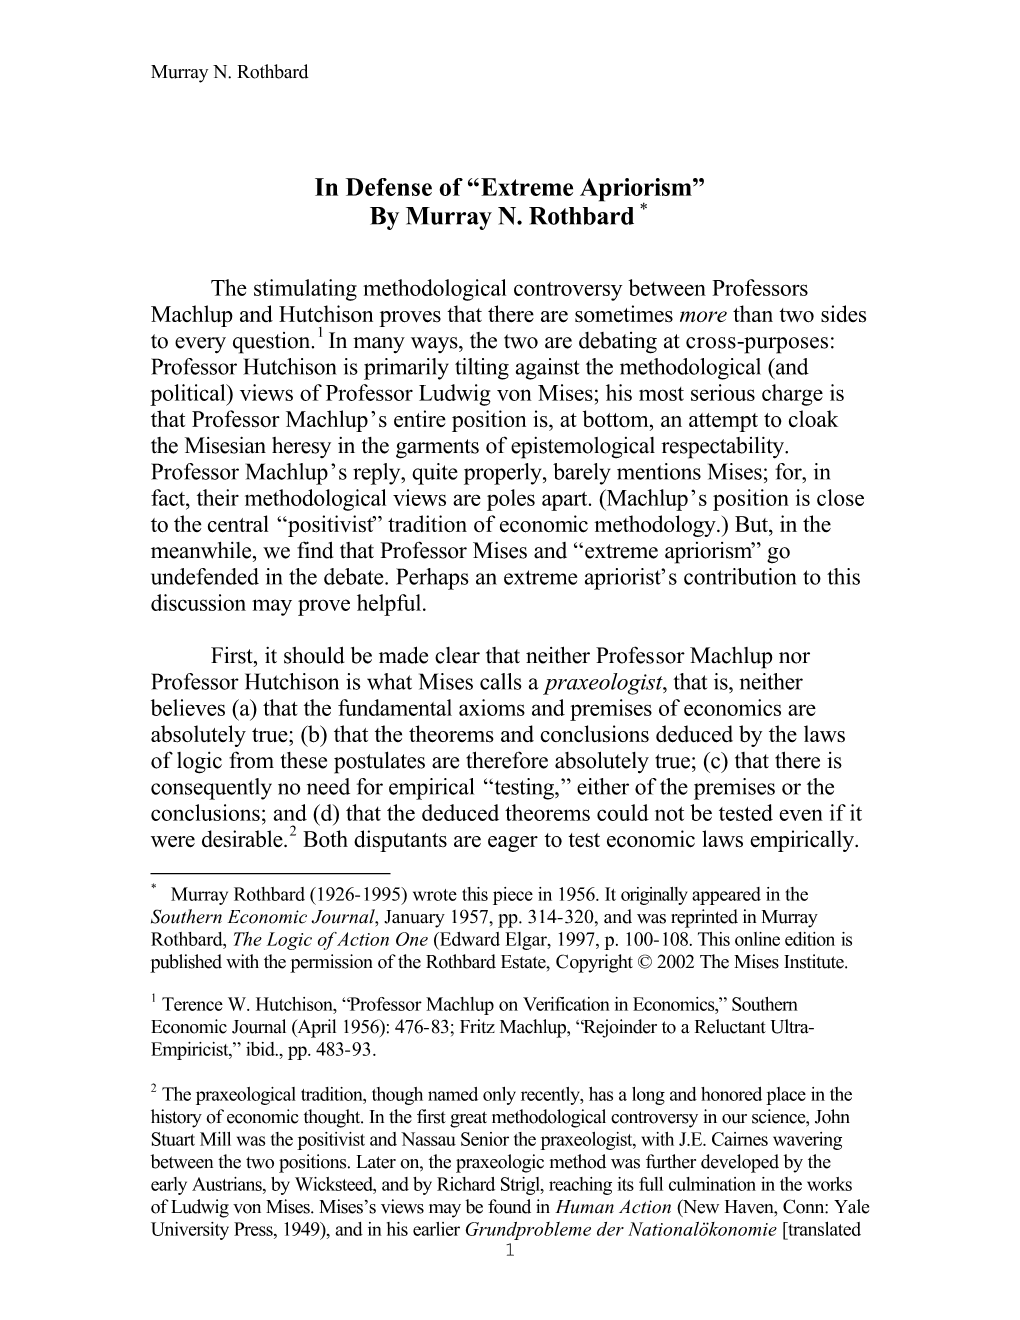 In Defense of “Extreme Apriorism” by Murray N. Rothbard *